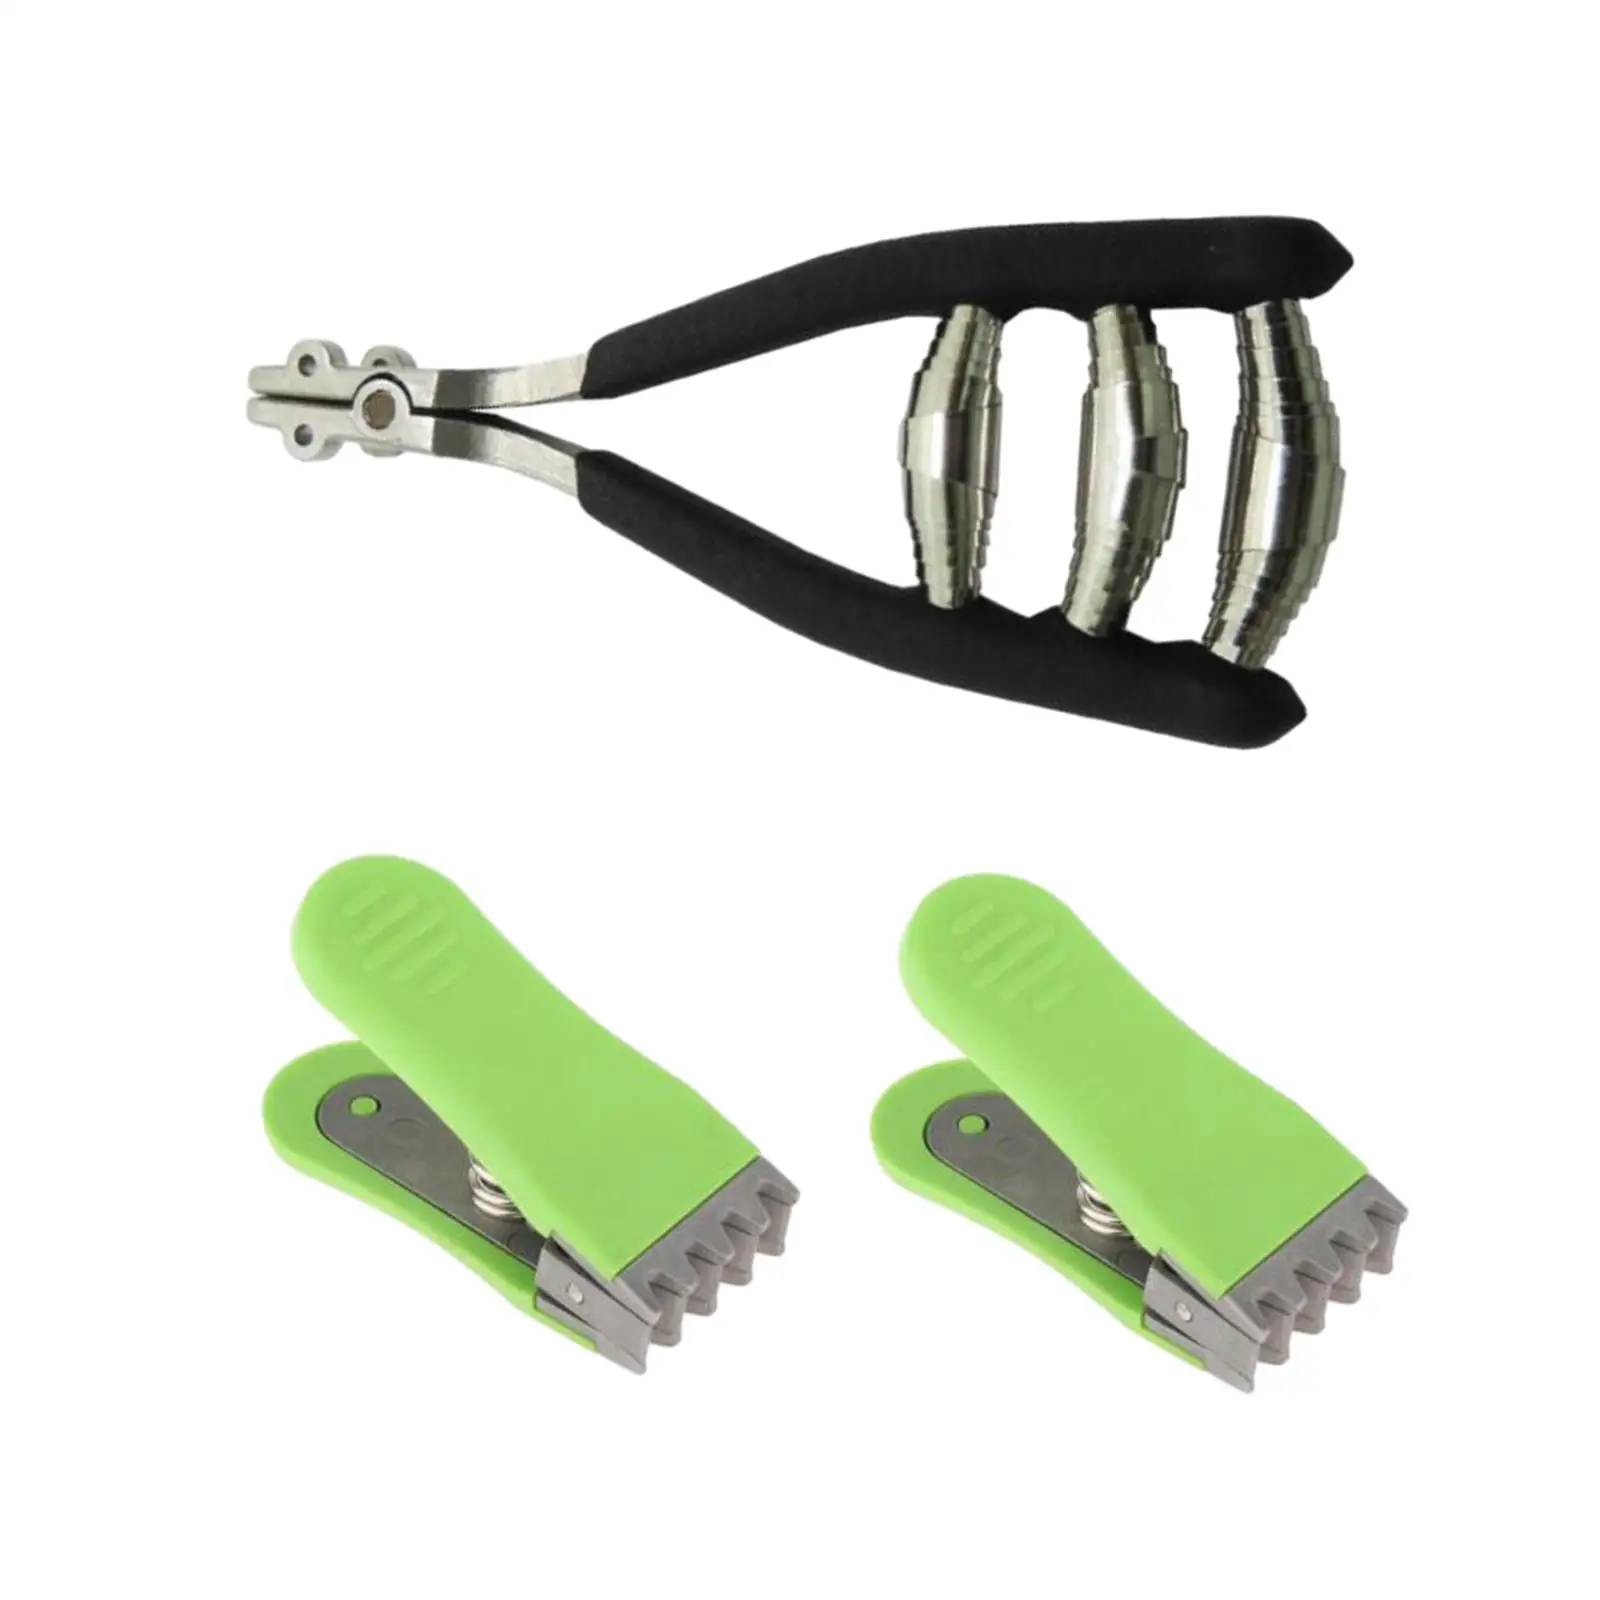 Sports Starting Clamp Manual Durable Wide Head 3 Spring Badminton Stringing Clamp Stringing Tool for Tennis Racquet Racket